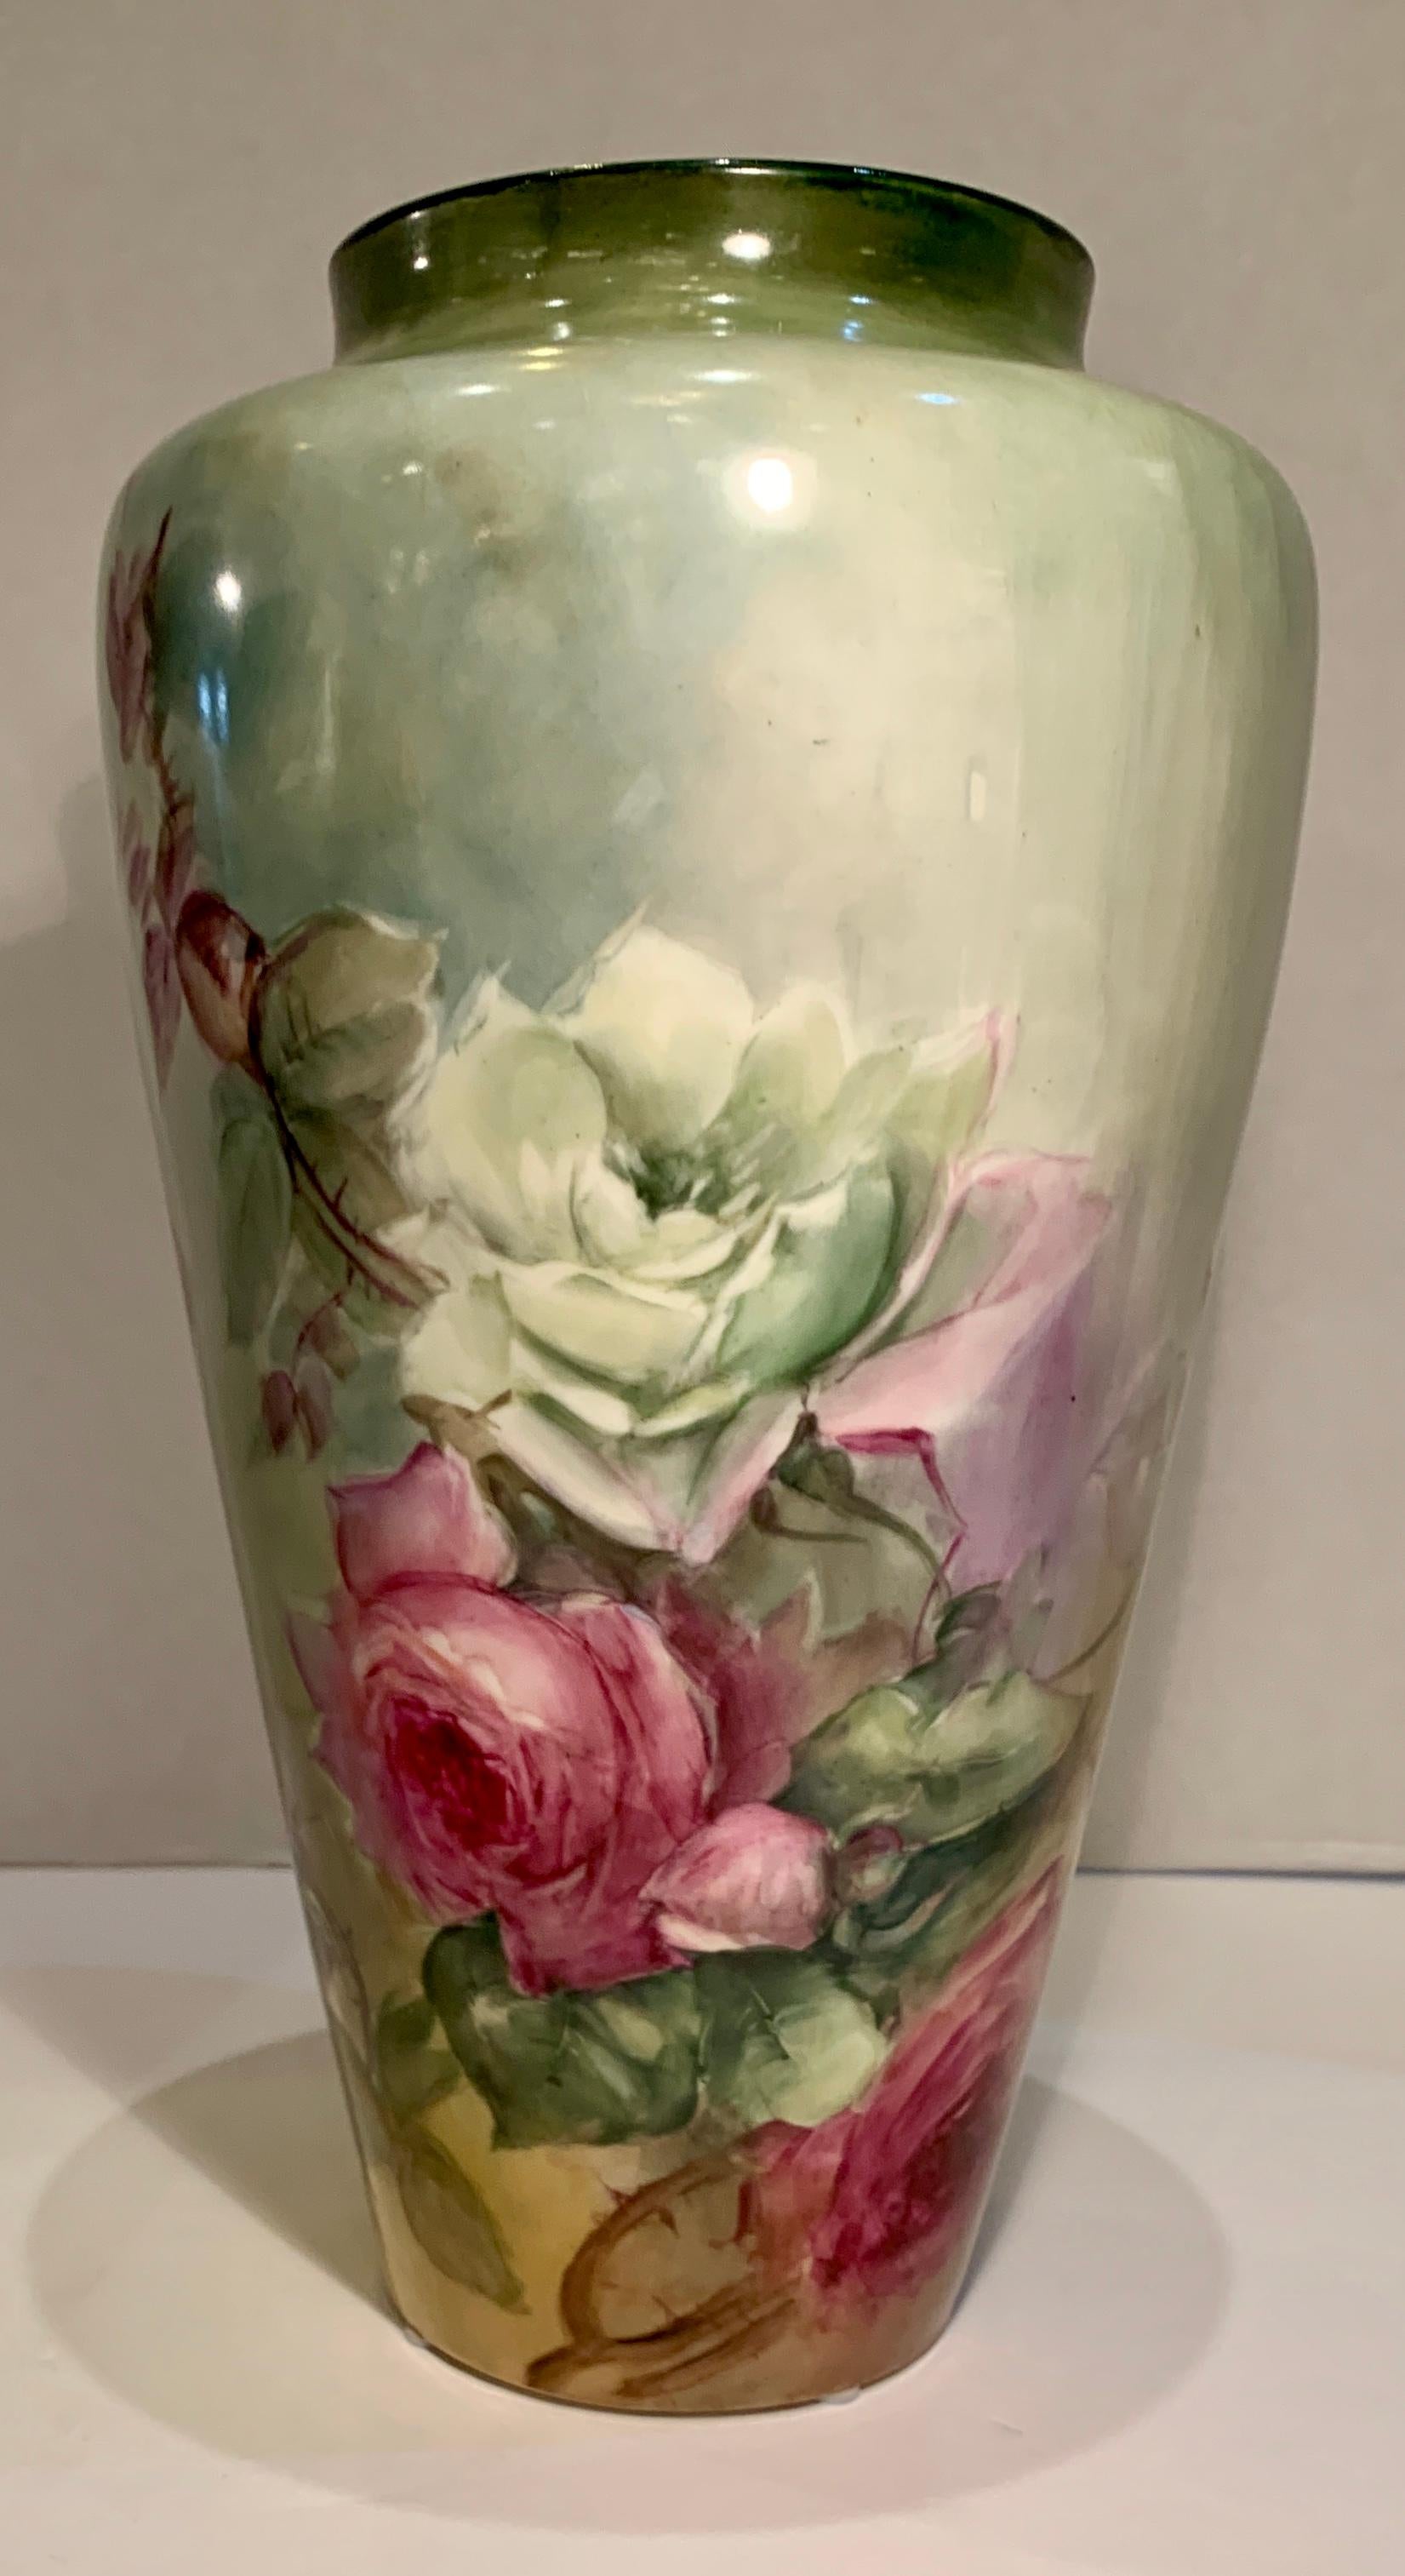 Exquisitely handmade and hand painted, turn of the century Victorian era antique porcelain vase features gorgeous, larger-than-life roses in full bloom, rosebuds and leaves, rendered in the naturalistic floral style popular in late nineteenth and